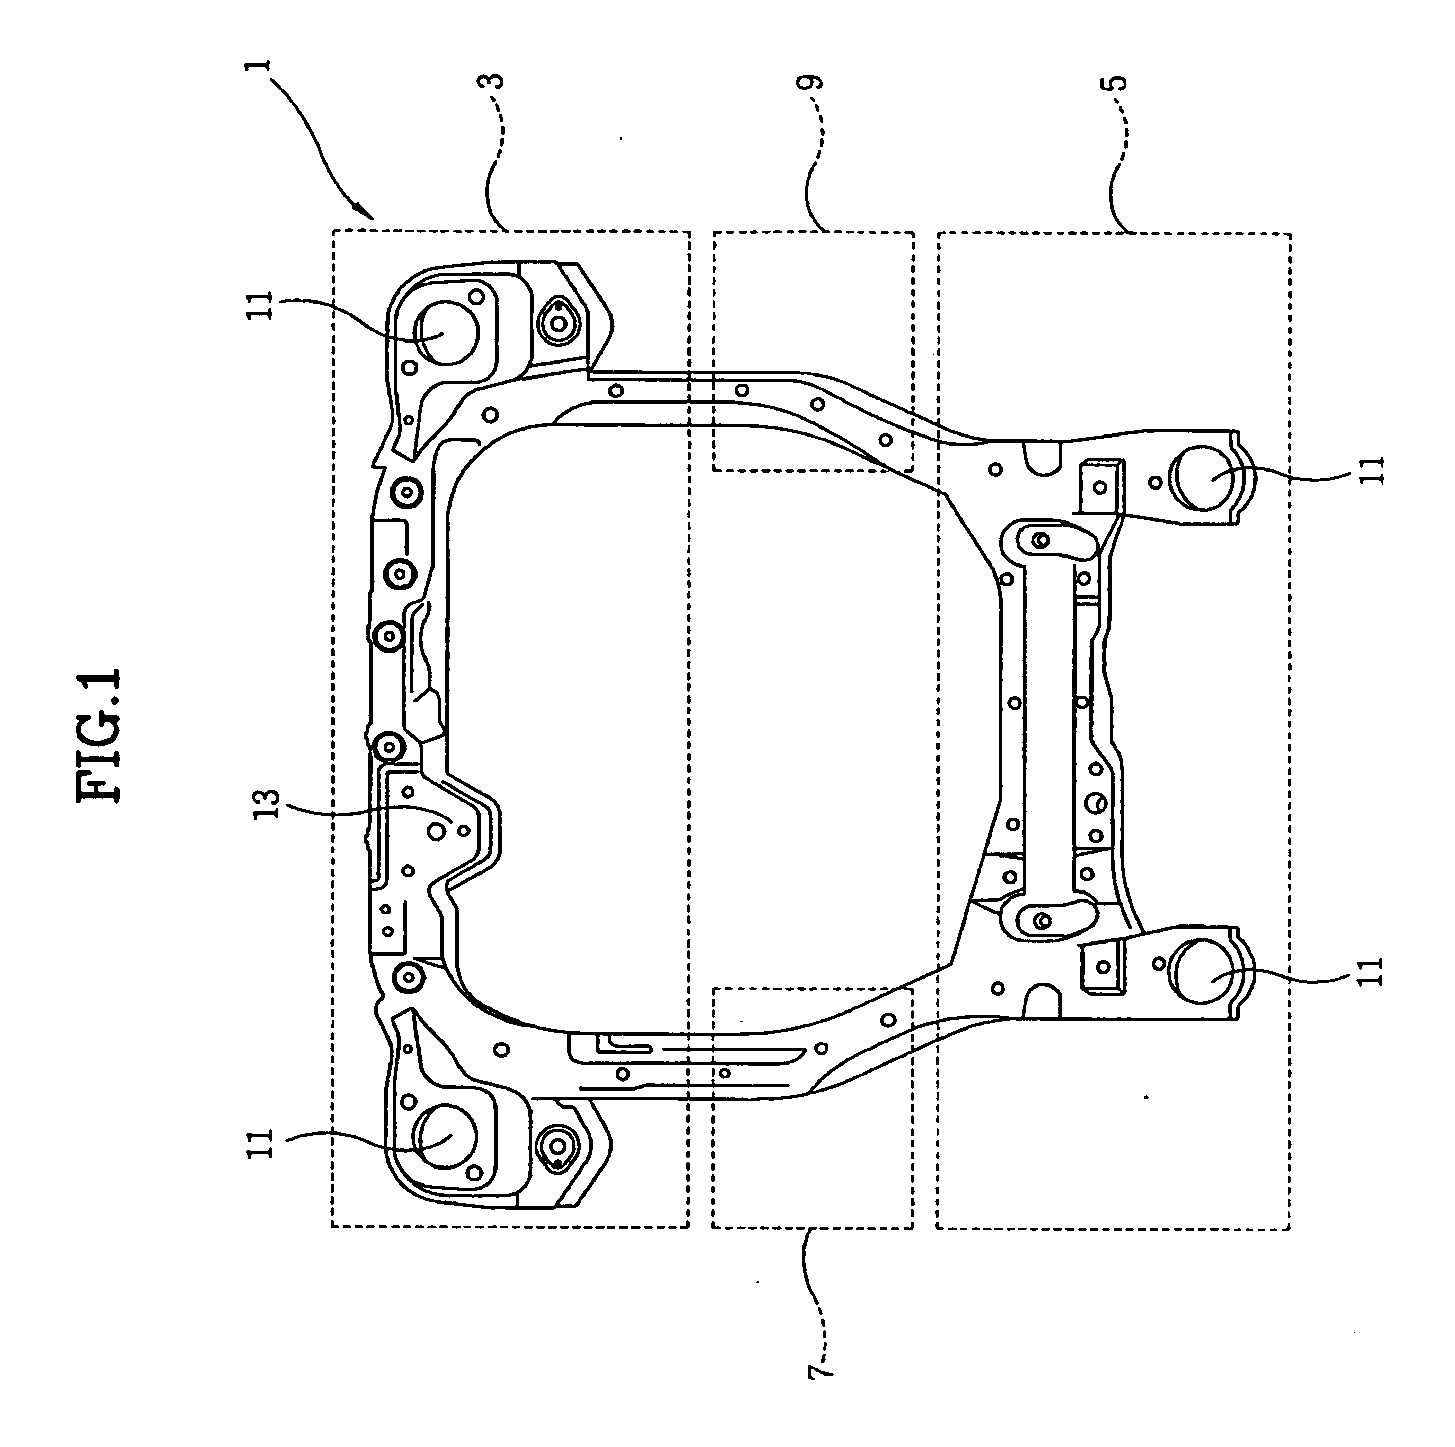 Method of manufacturing subframe for vehicles